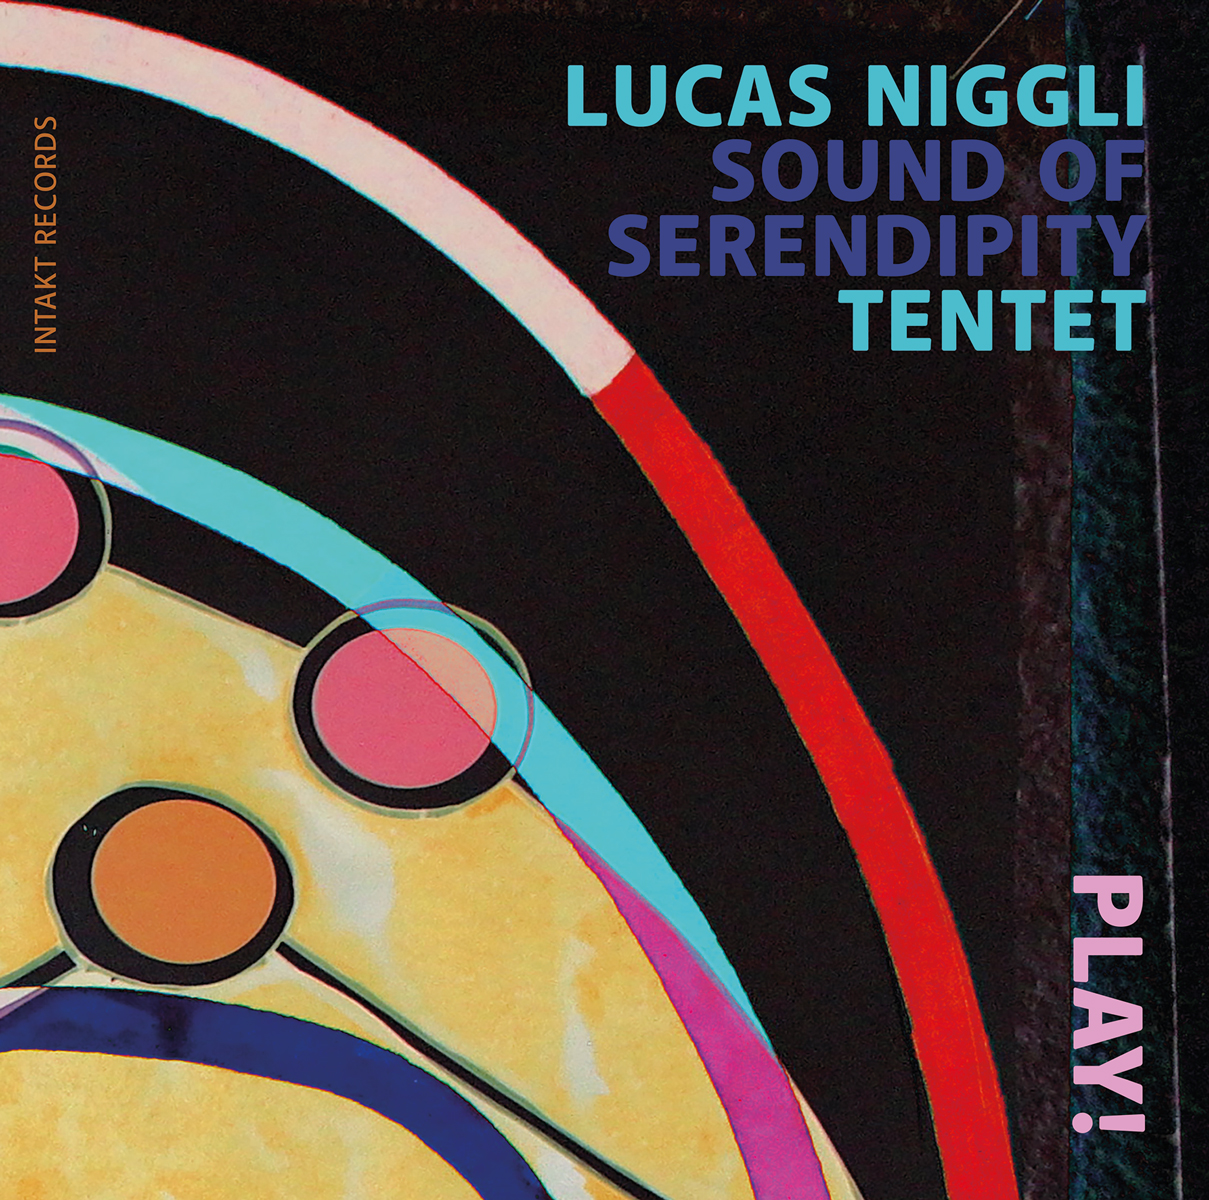 LUCAS NIGGLI
SOUND OF SERENDIPITY TENTET
PLAY! cover front intakt records